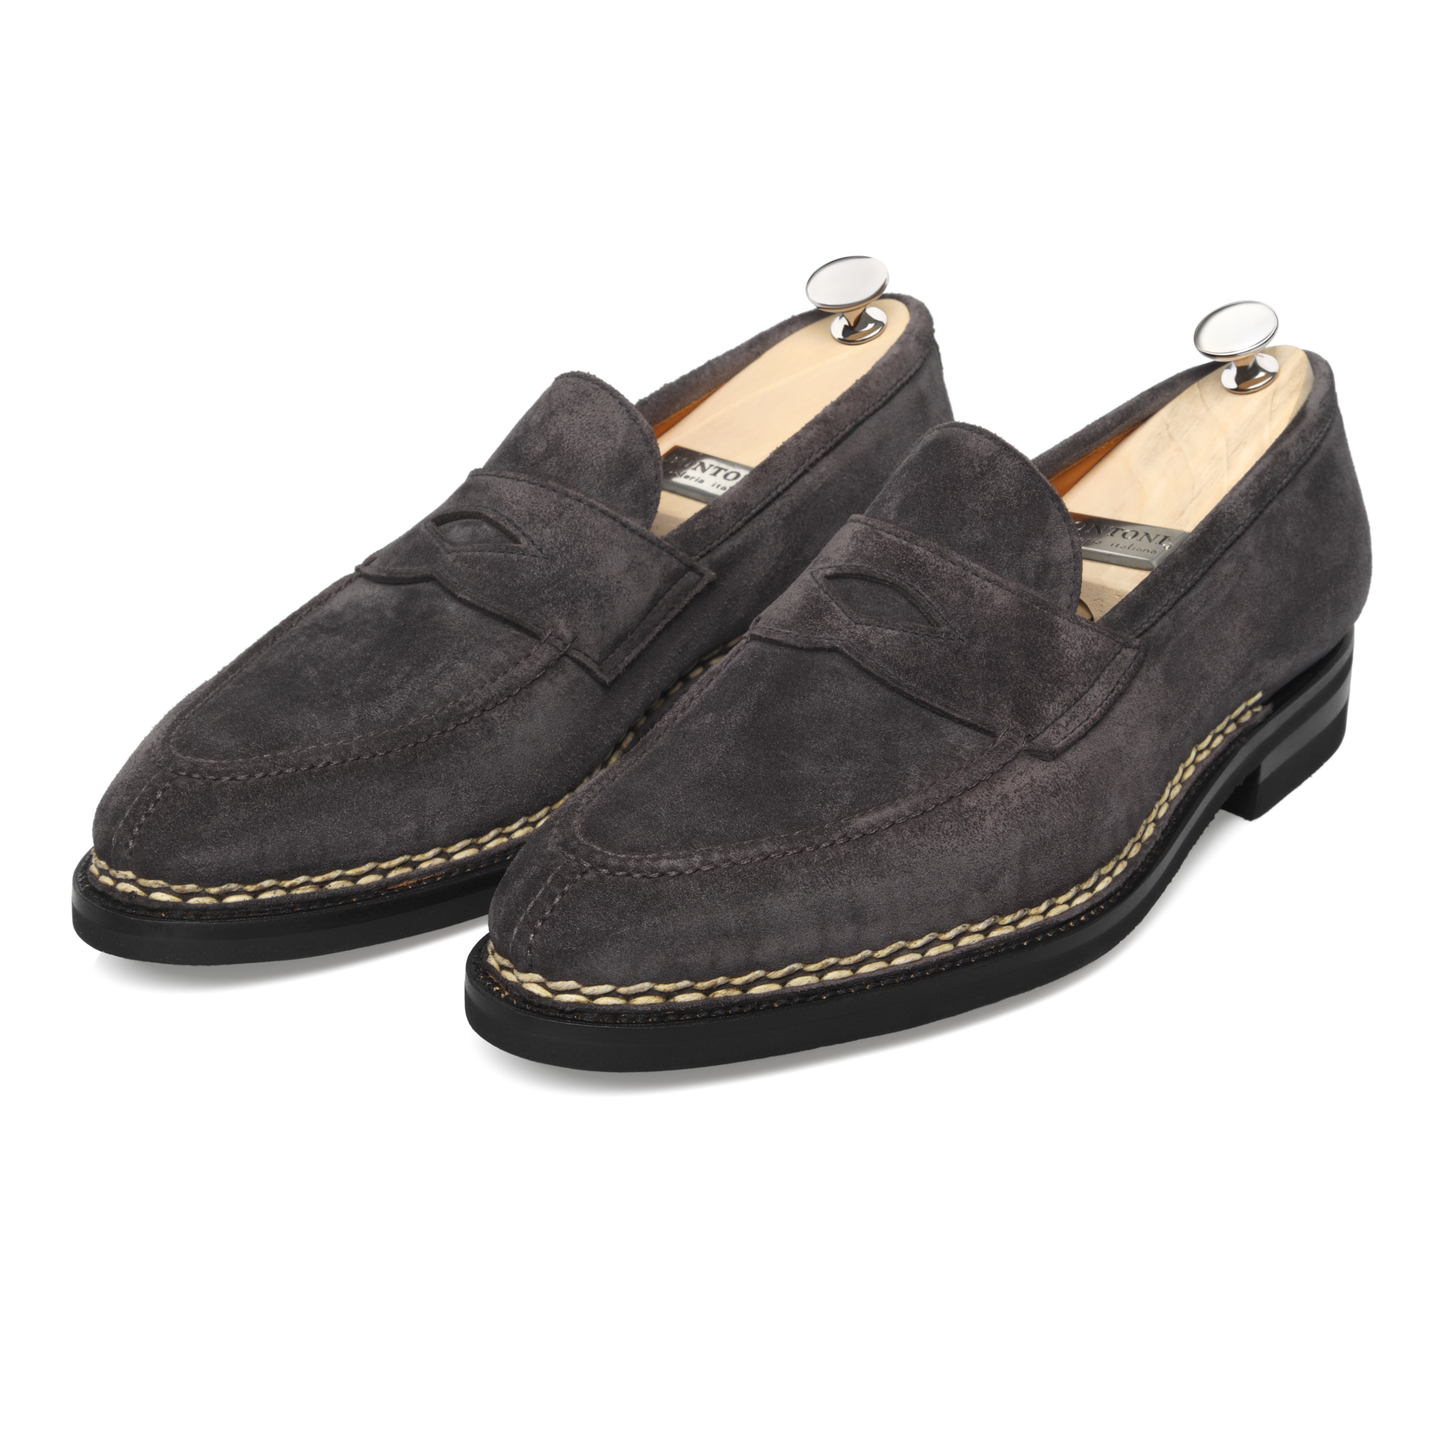 «Principe Split» Classic Suede Loafer with Hand-Stitched Apron and Split Toe in Grey